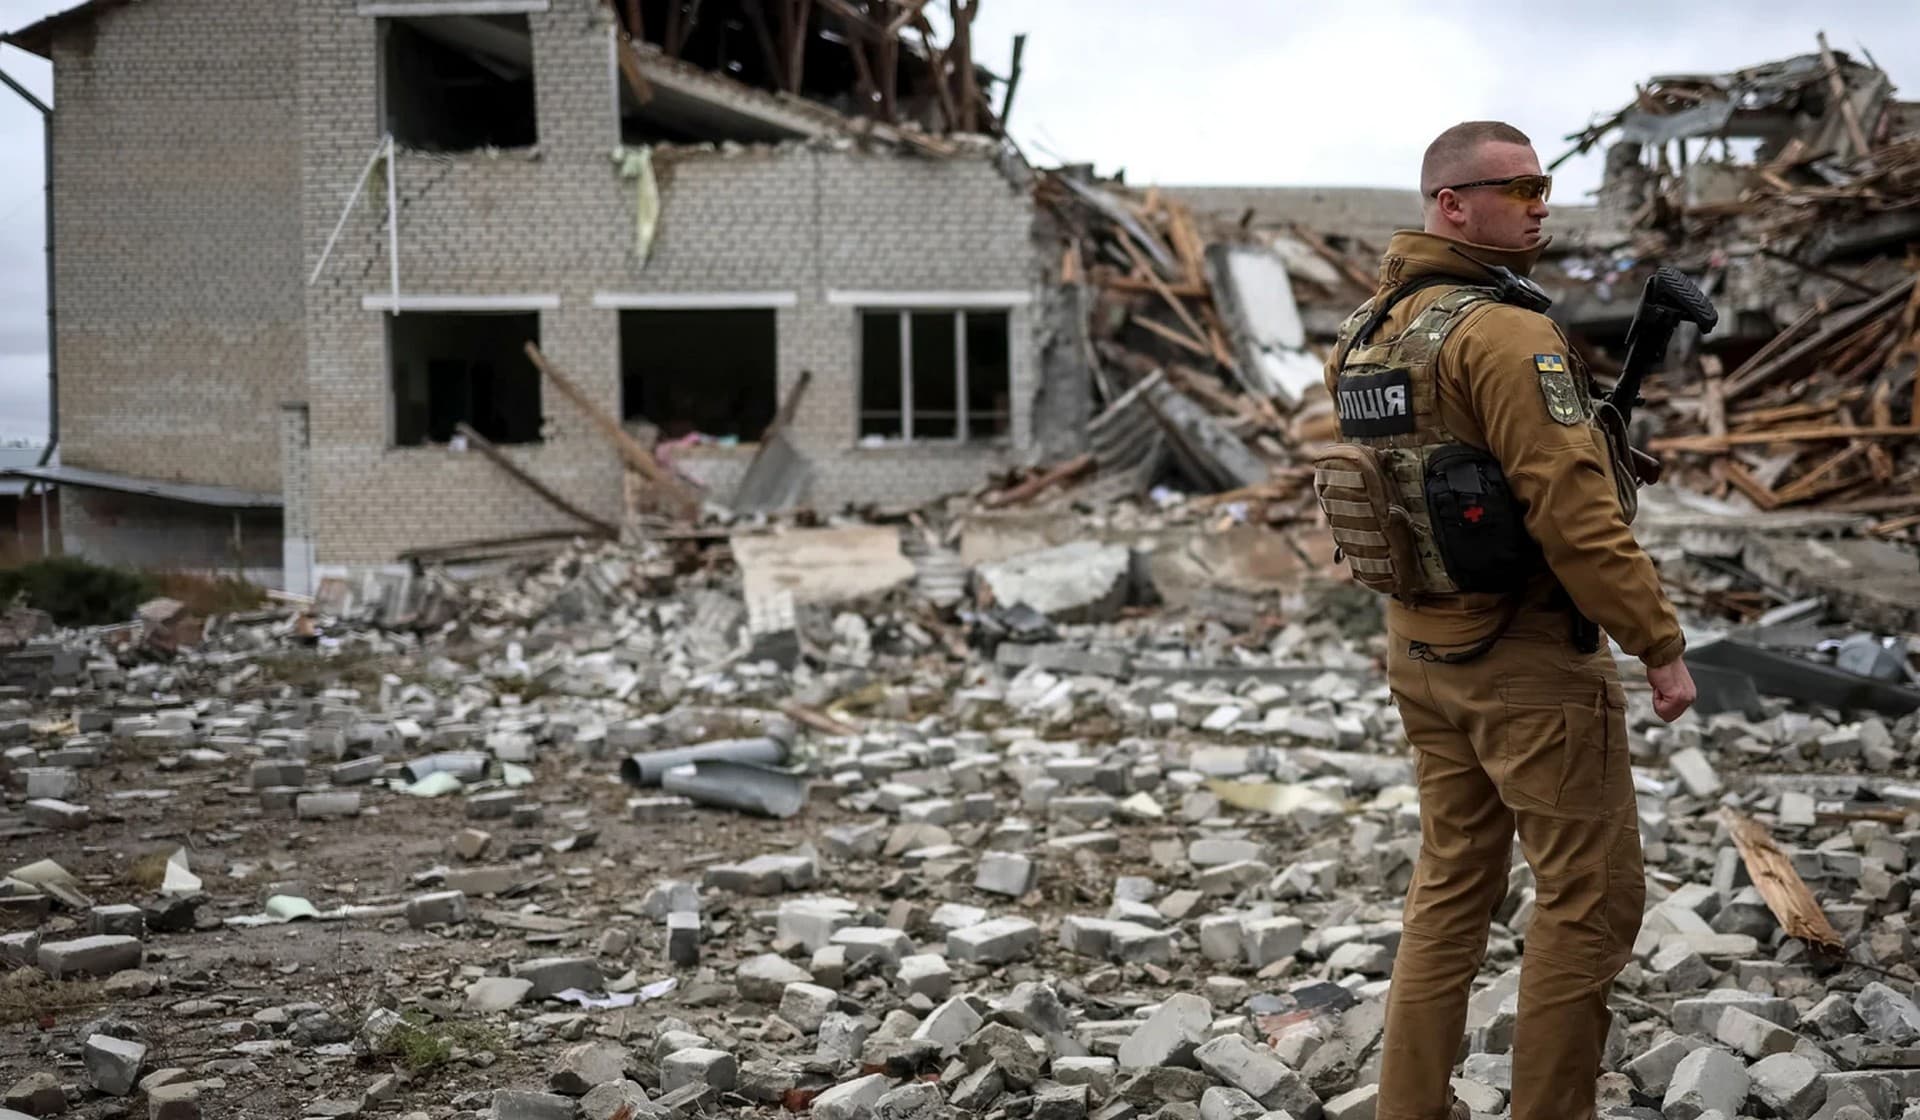 A Ukrainian police officer stands guard near a destroyed school building in the village of Verbivka